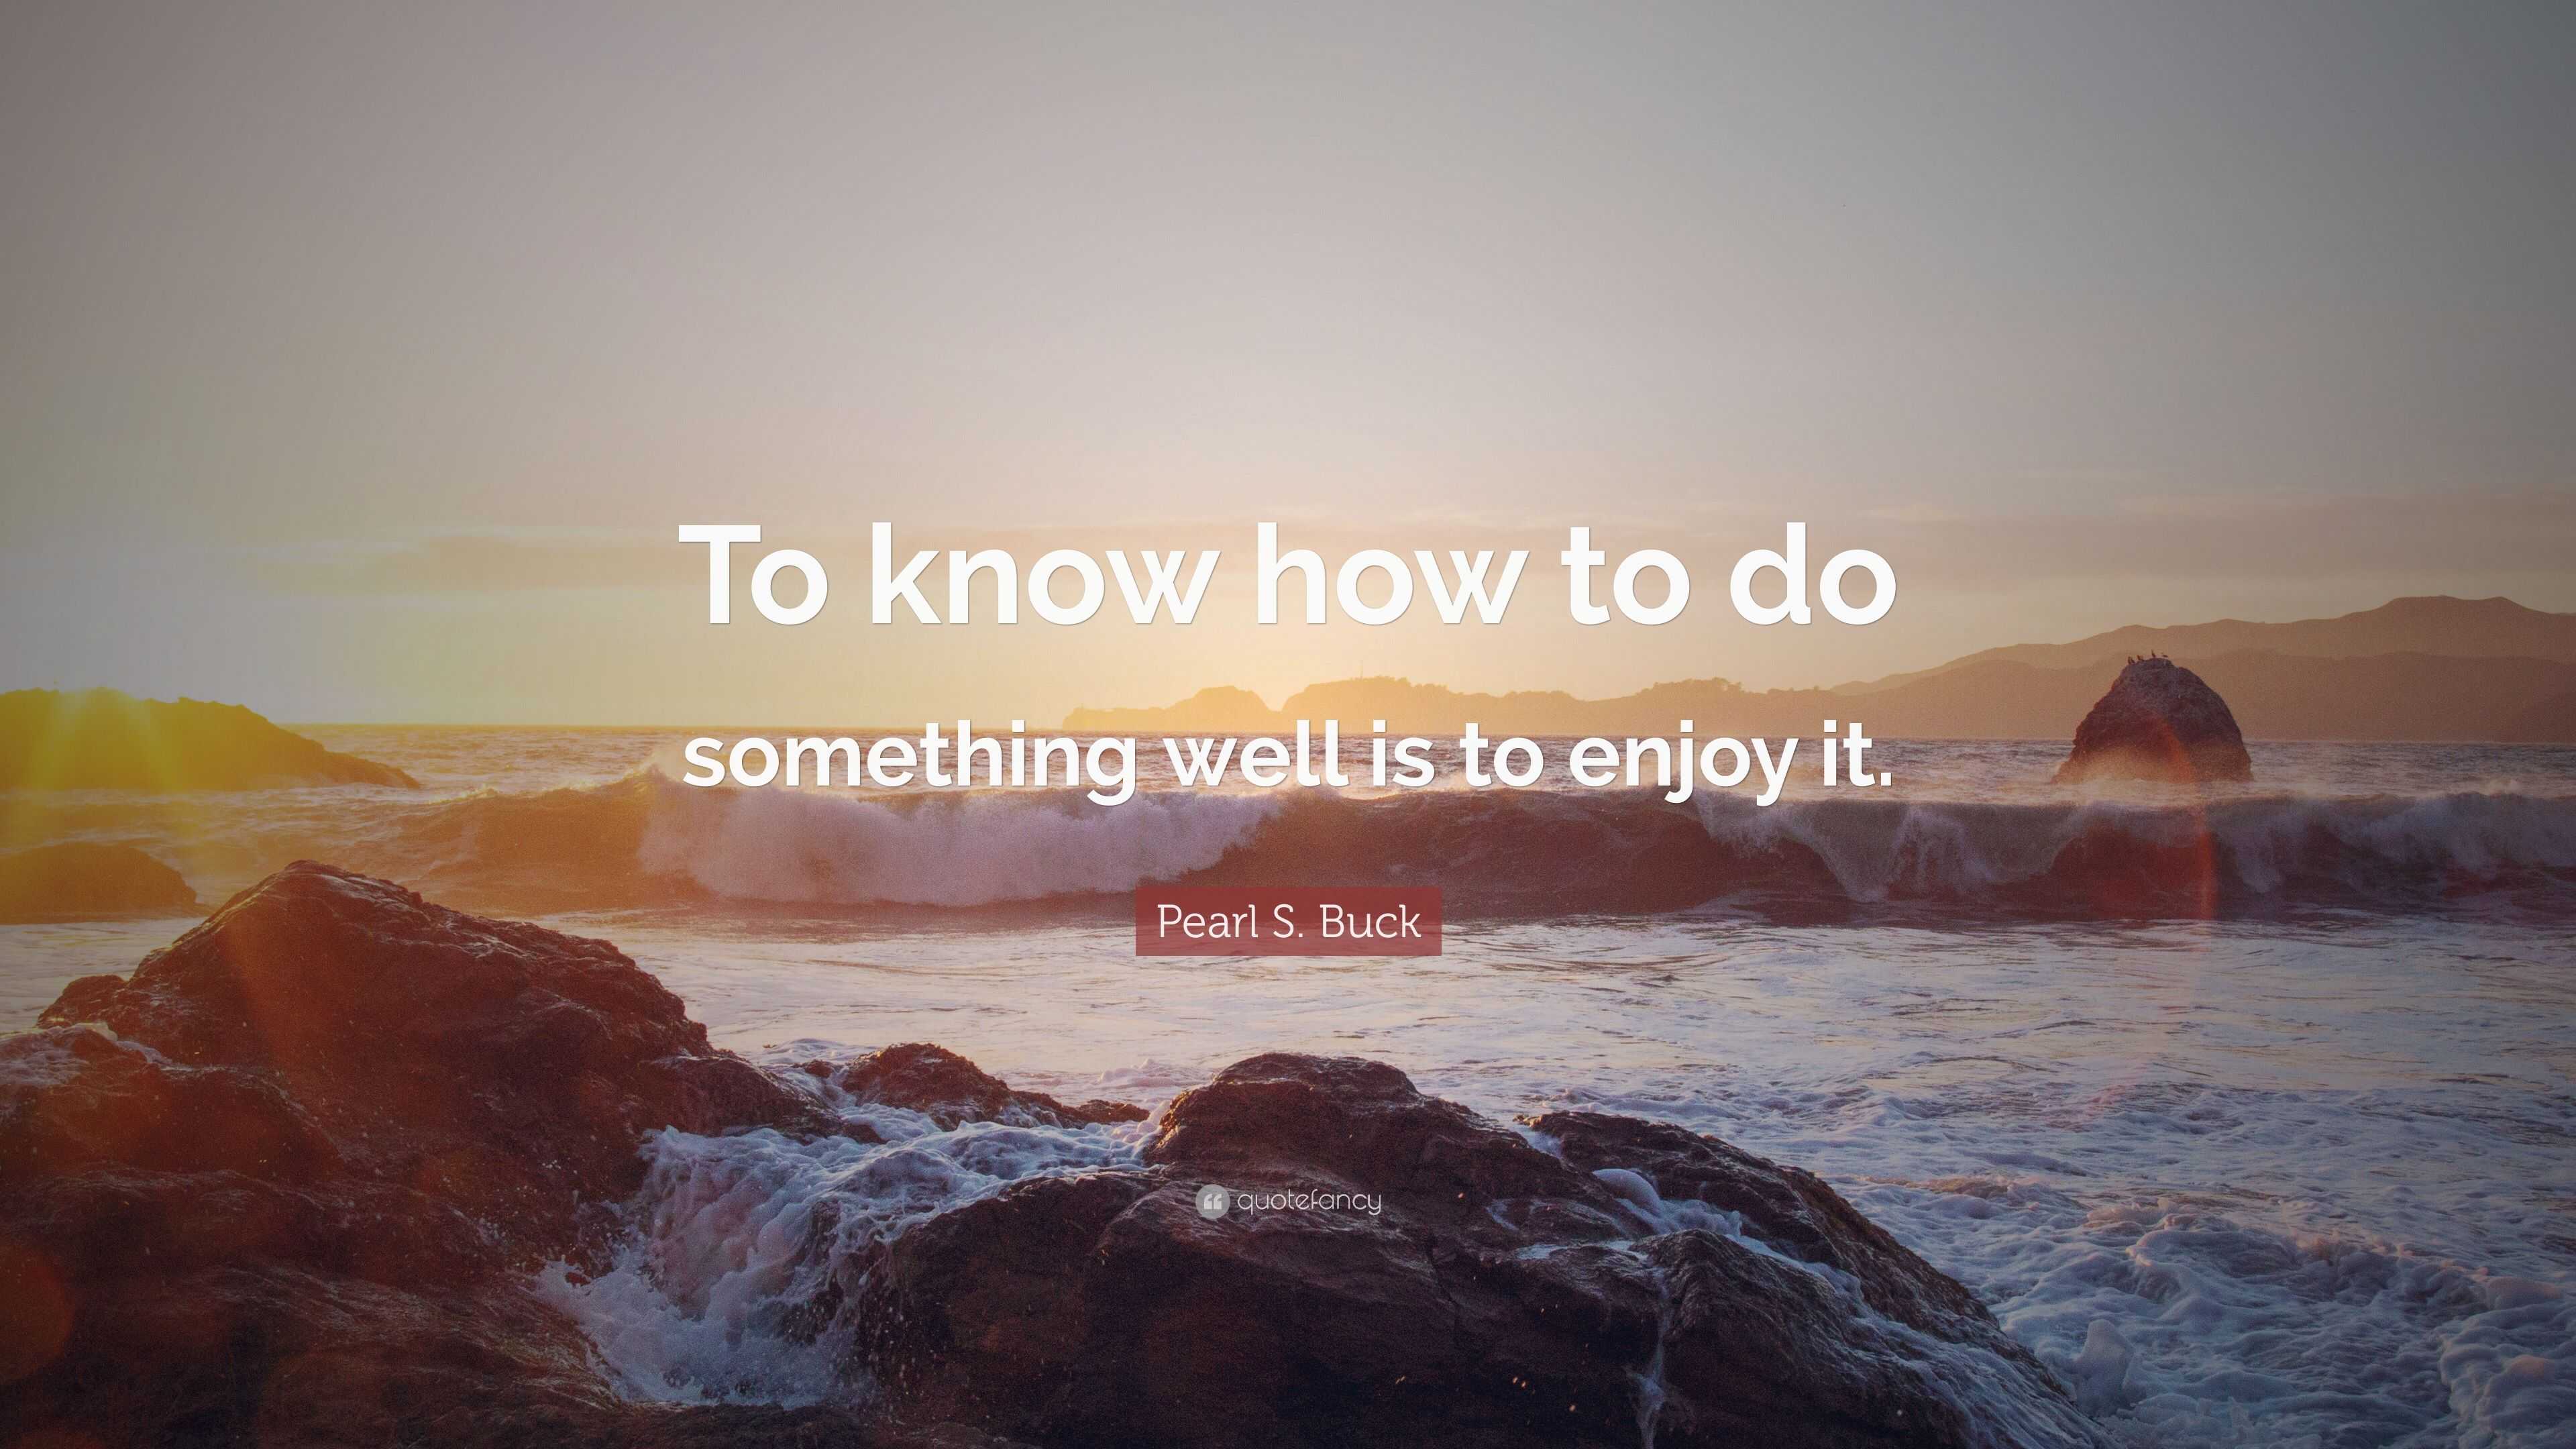 Pearl S. Buck Quote: “To know how to do something well is to enjoy it.”